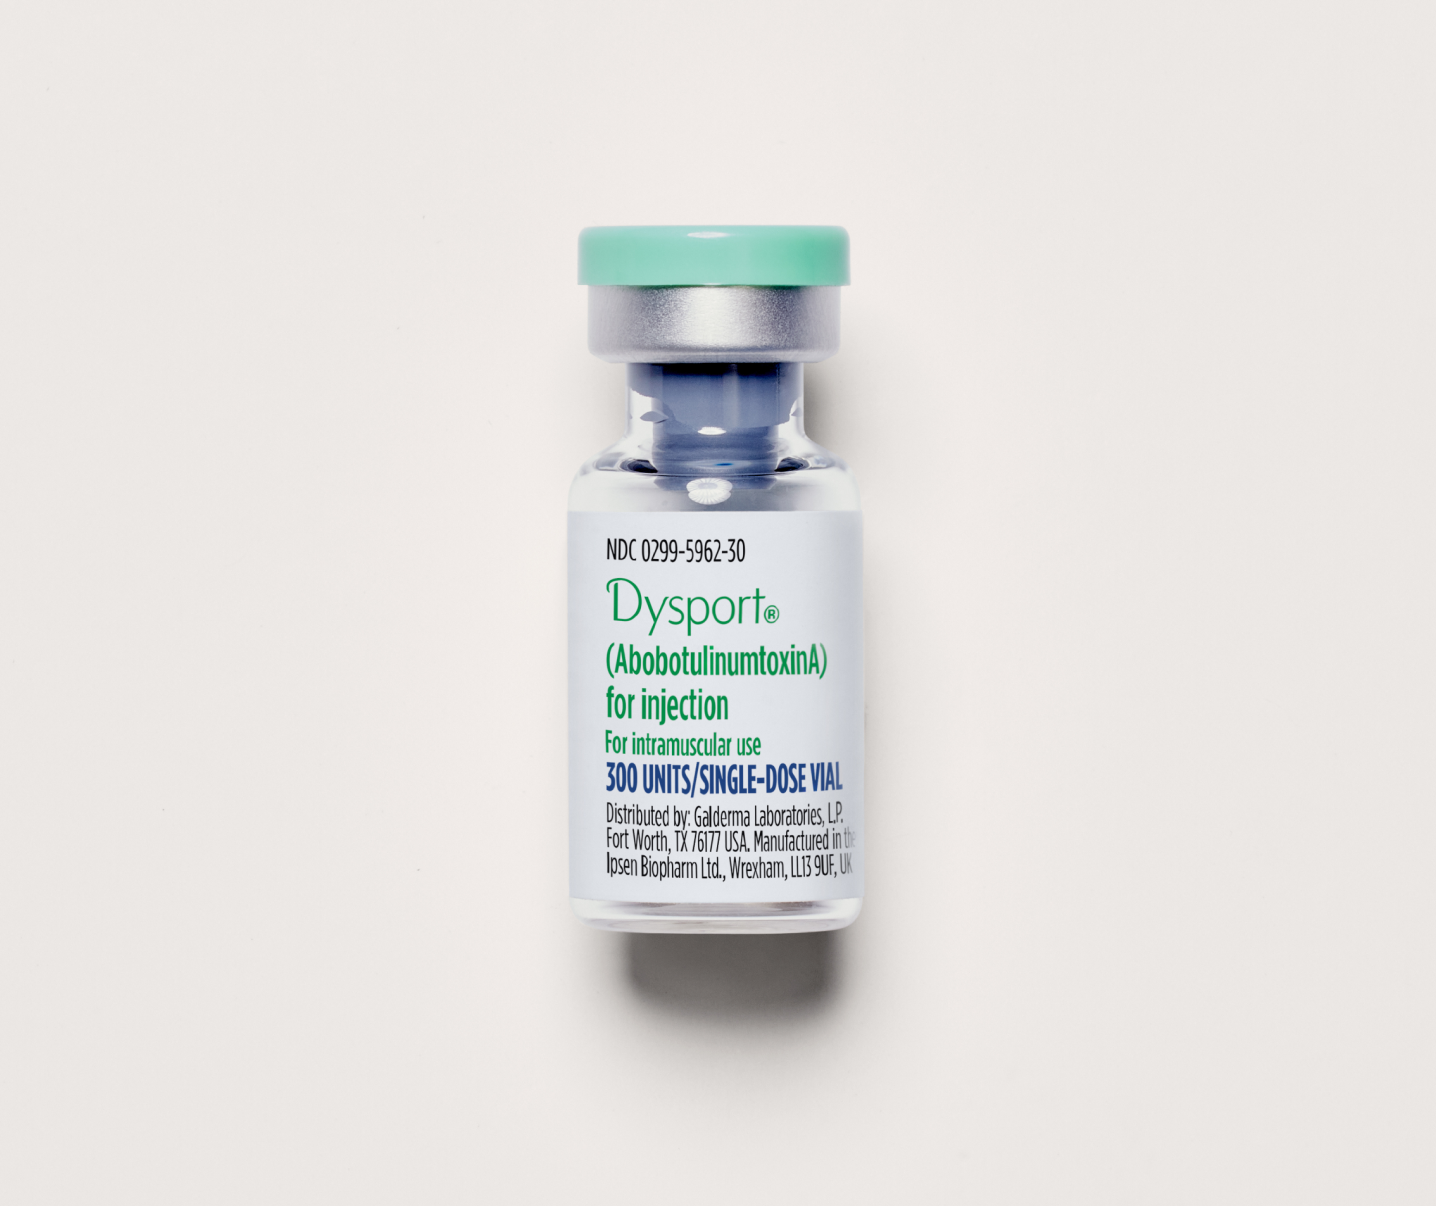 Actual vial of Dysport product